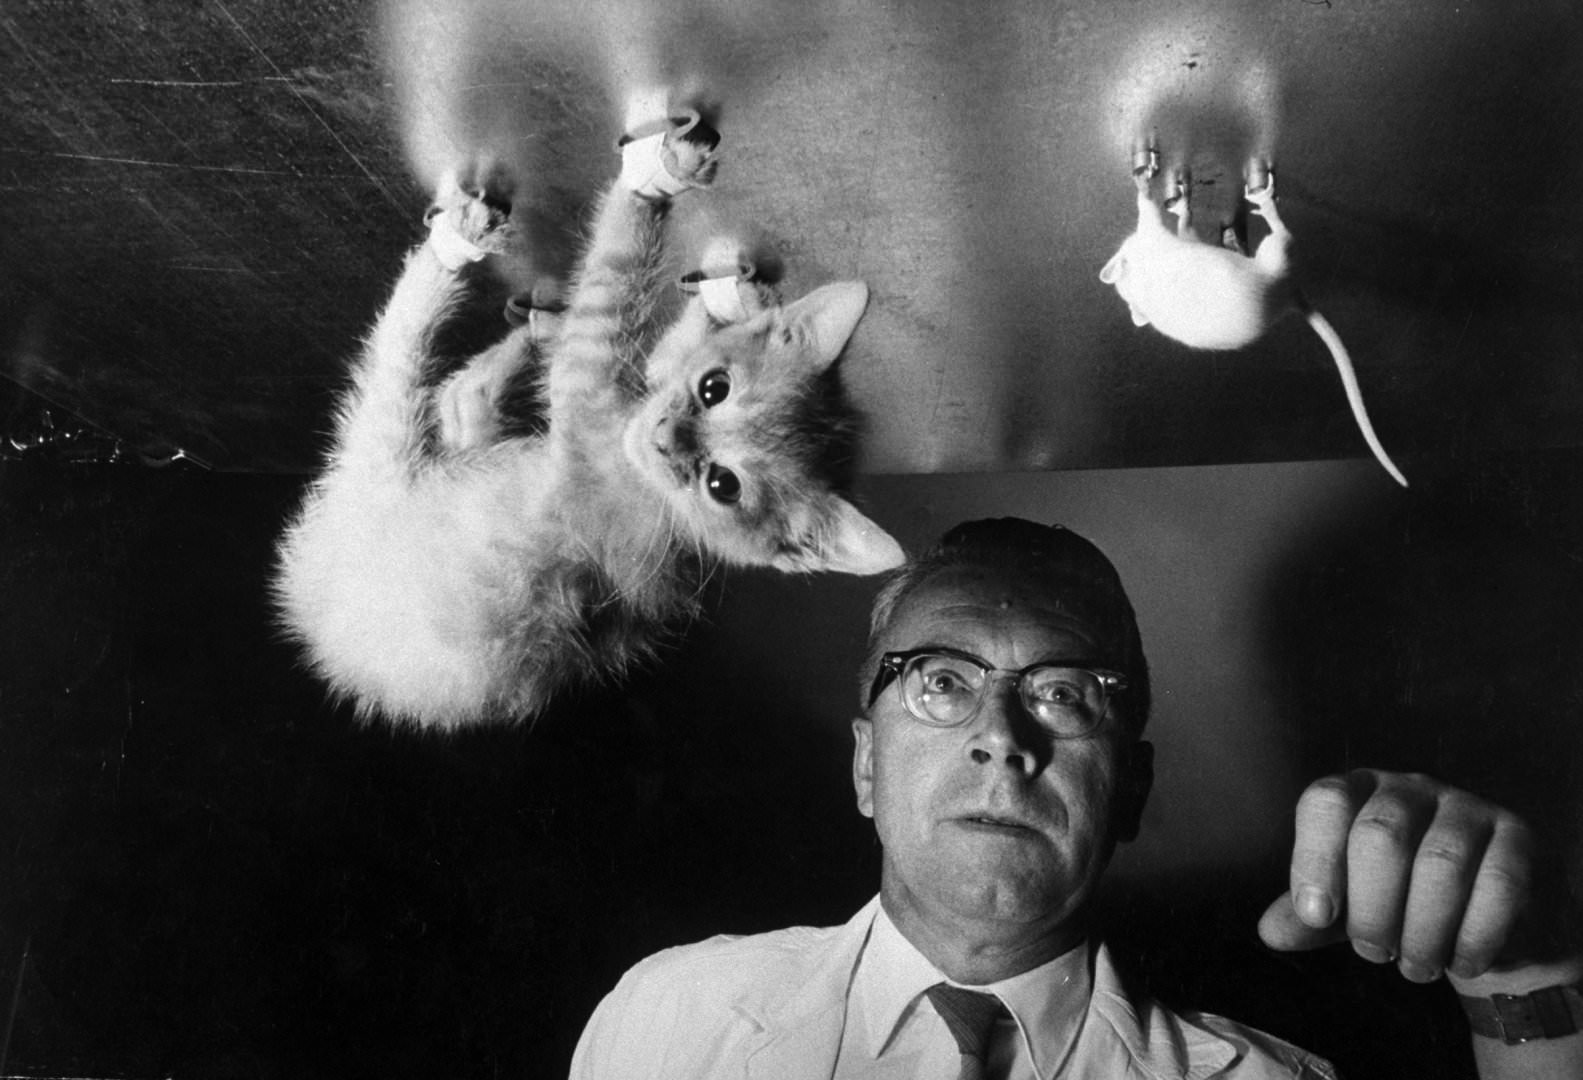 Naval Researcher Dr. Dietrich Beischer Testing Effects Of Being Upside-Down For Prolonged Periods Of Time On A Cat